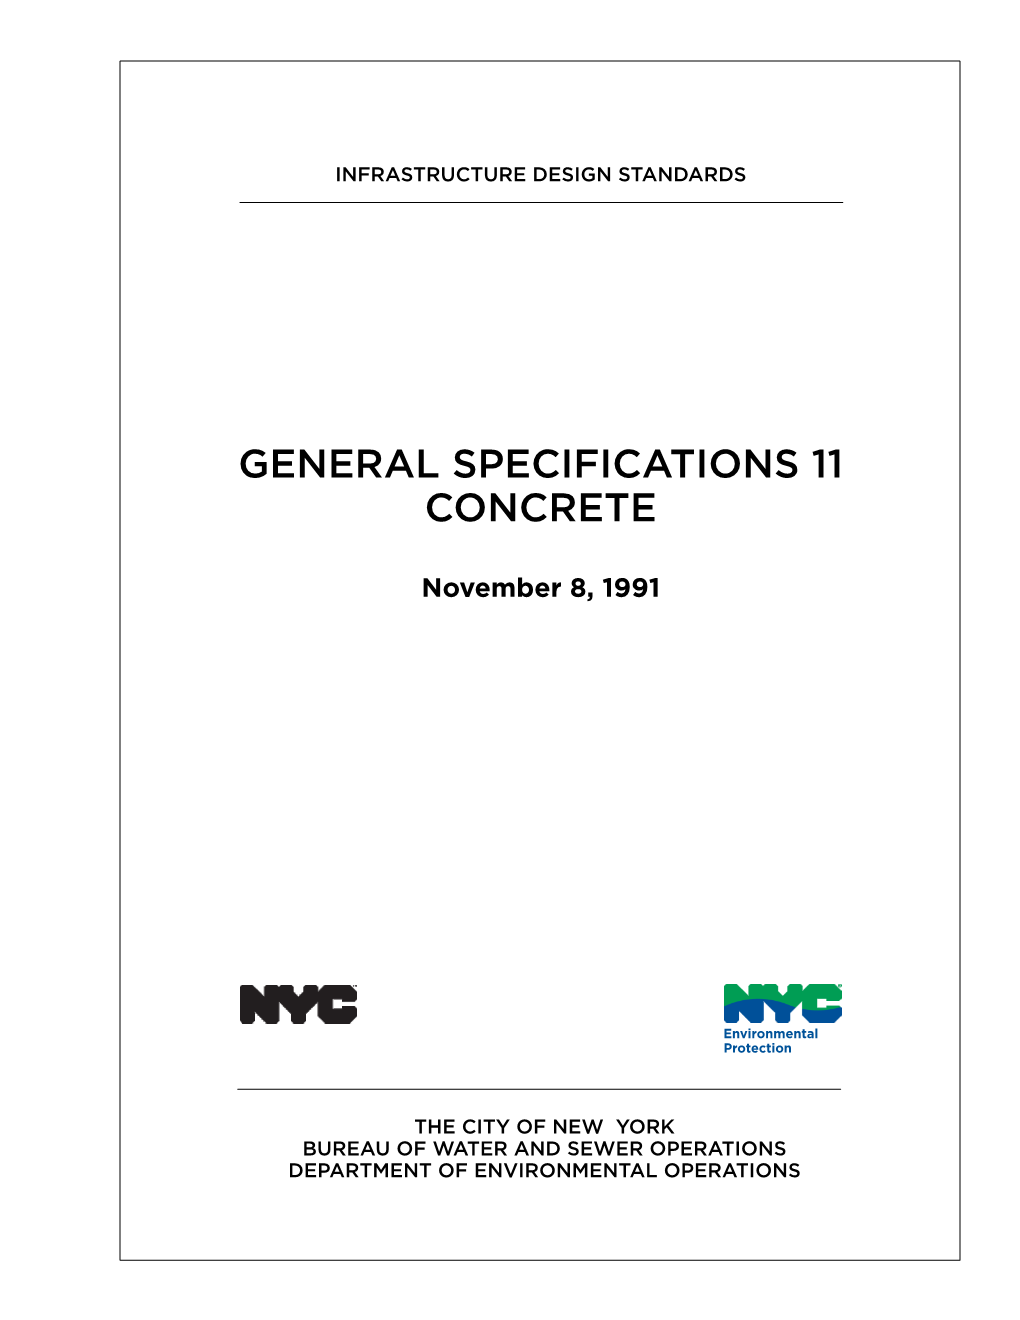 General Specifications 11 Concrete